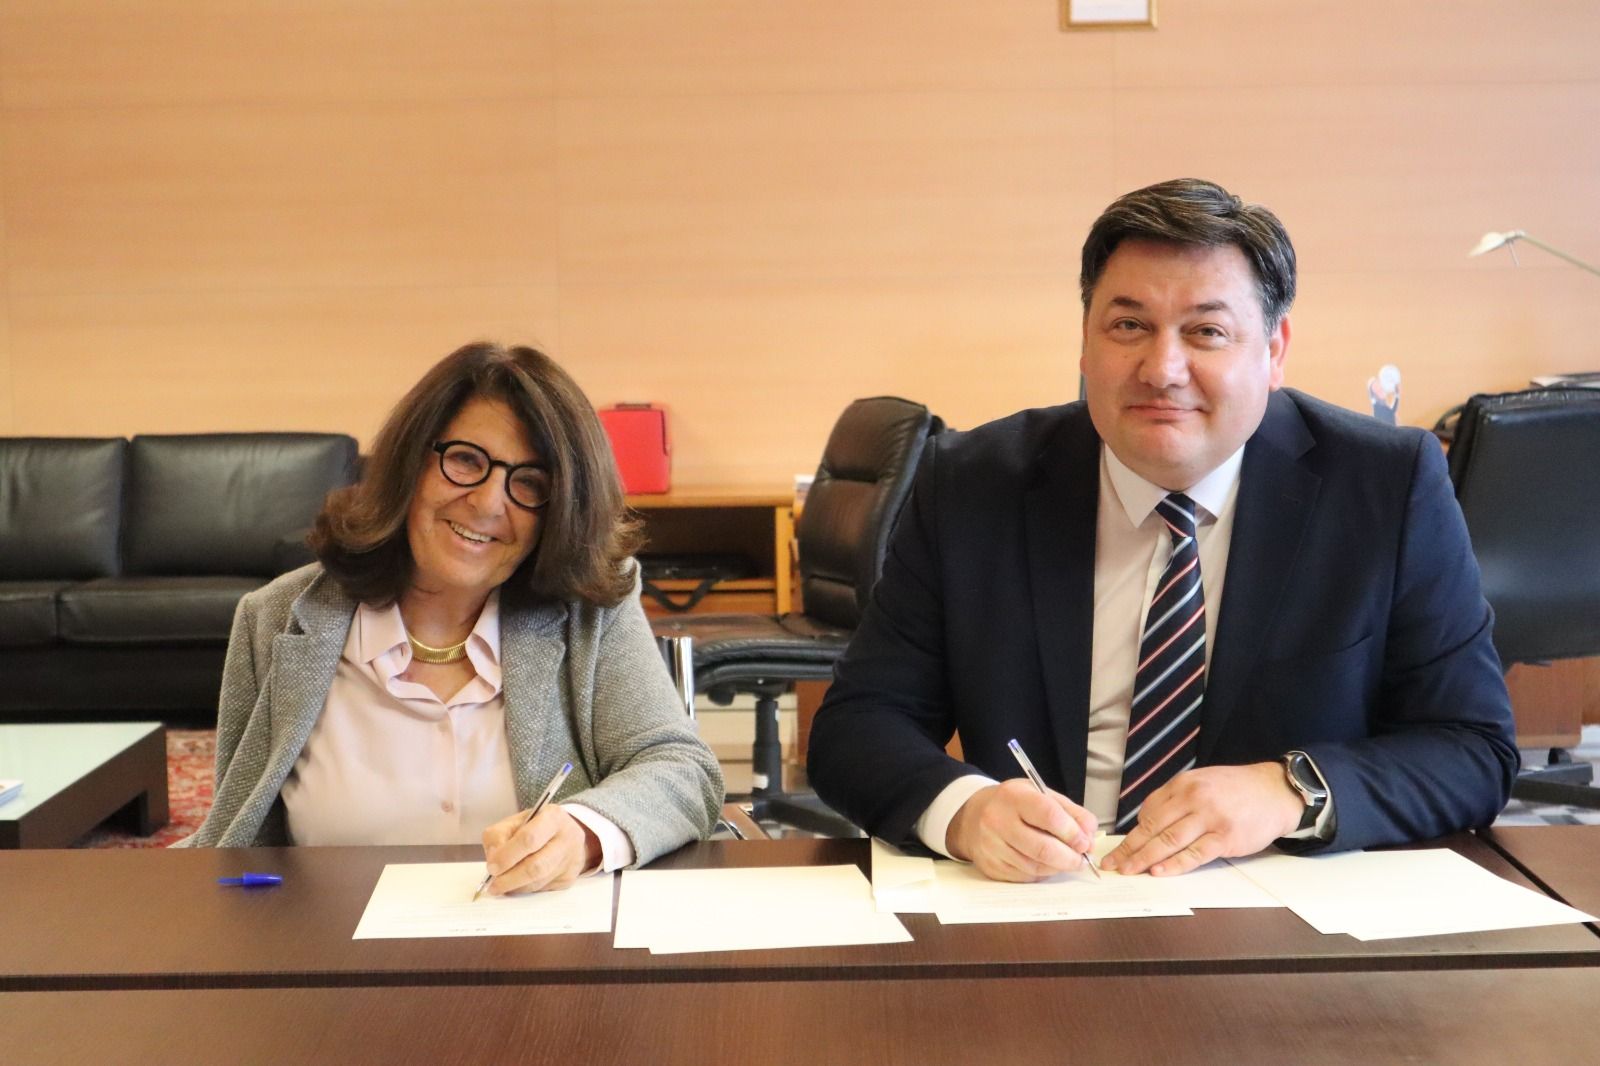 NEW INTERNATIONAL AGREEMENT - THE ACADEMY AND THE ITALIAN NATIONAL SCHOOL OF PUBLIC ADMINISTRATION MADE THE COOPERATION OFFICIAL